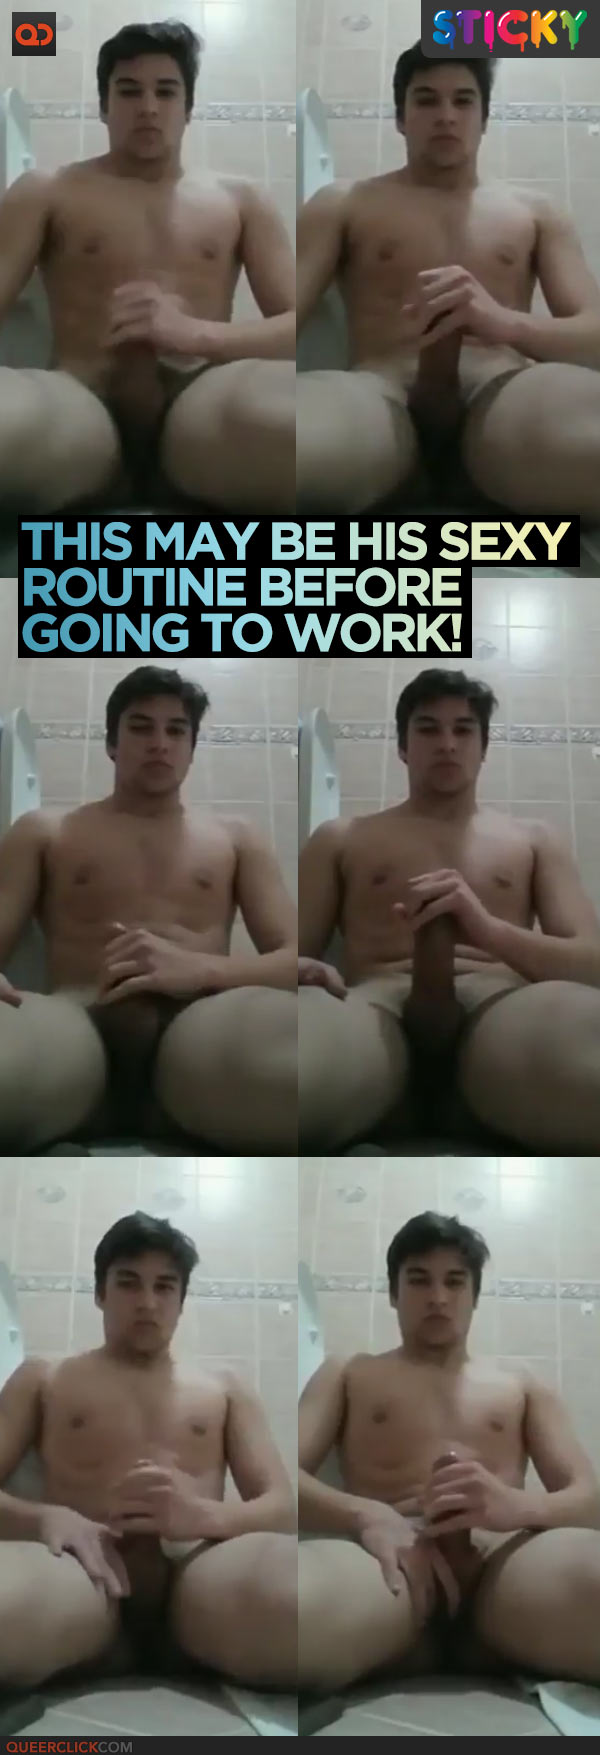 This May Be His Sexy Routine Before Going To Work!